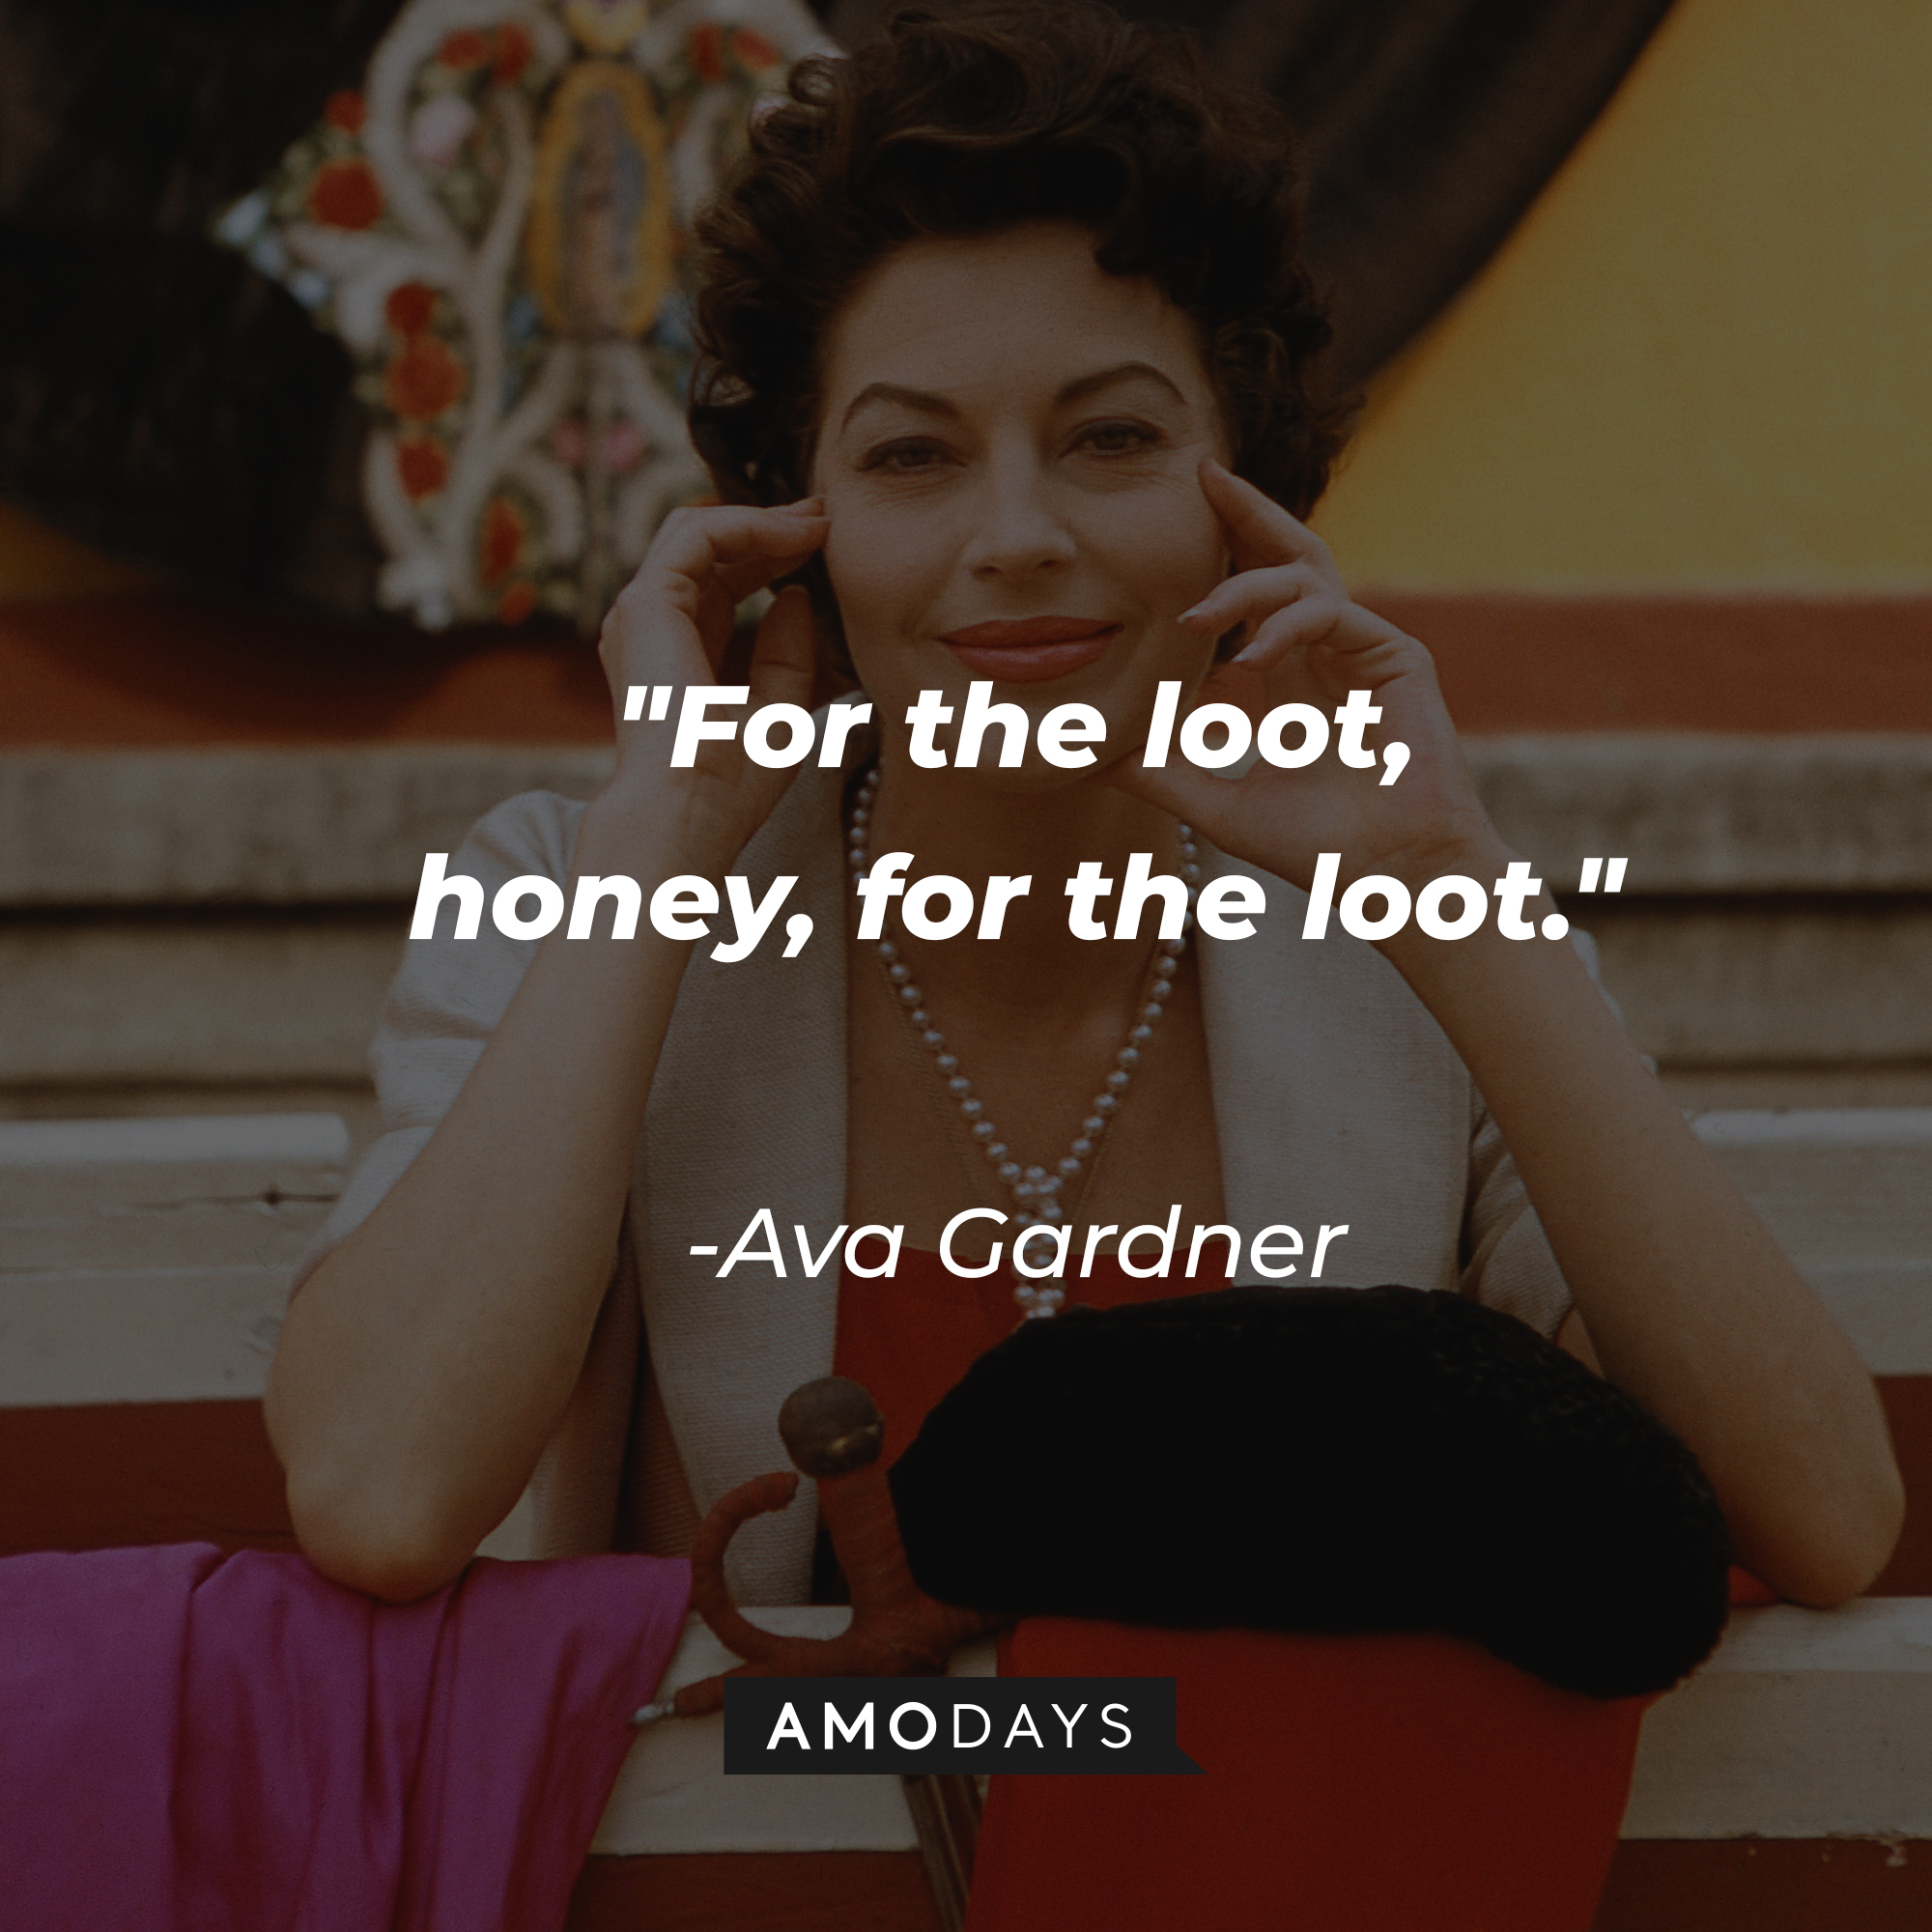 Ava Gardner with her quote: “For the loot, honey, for the loot.”  | Source: Getty Images